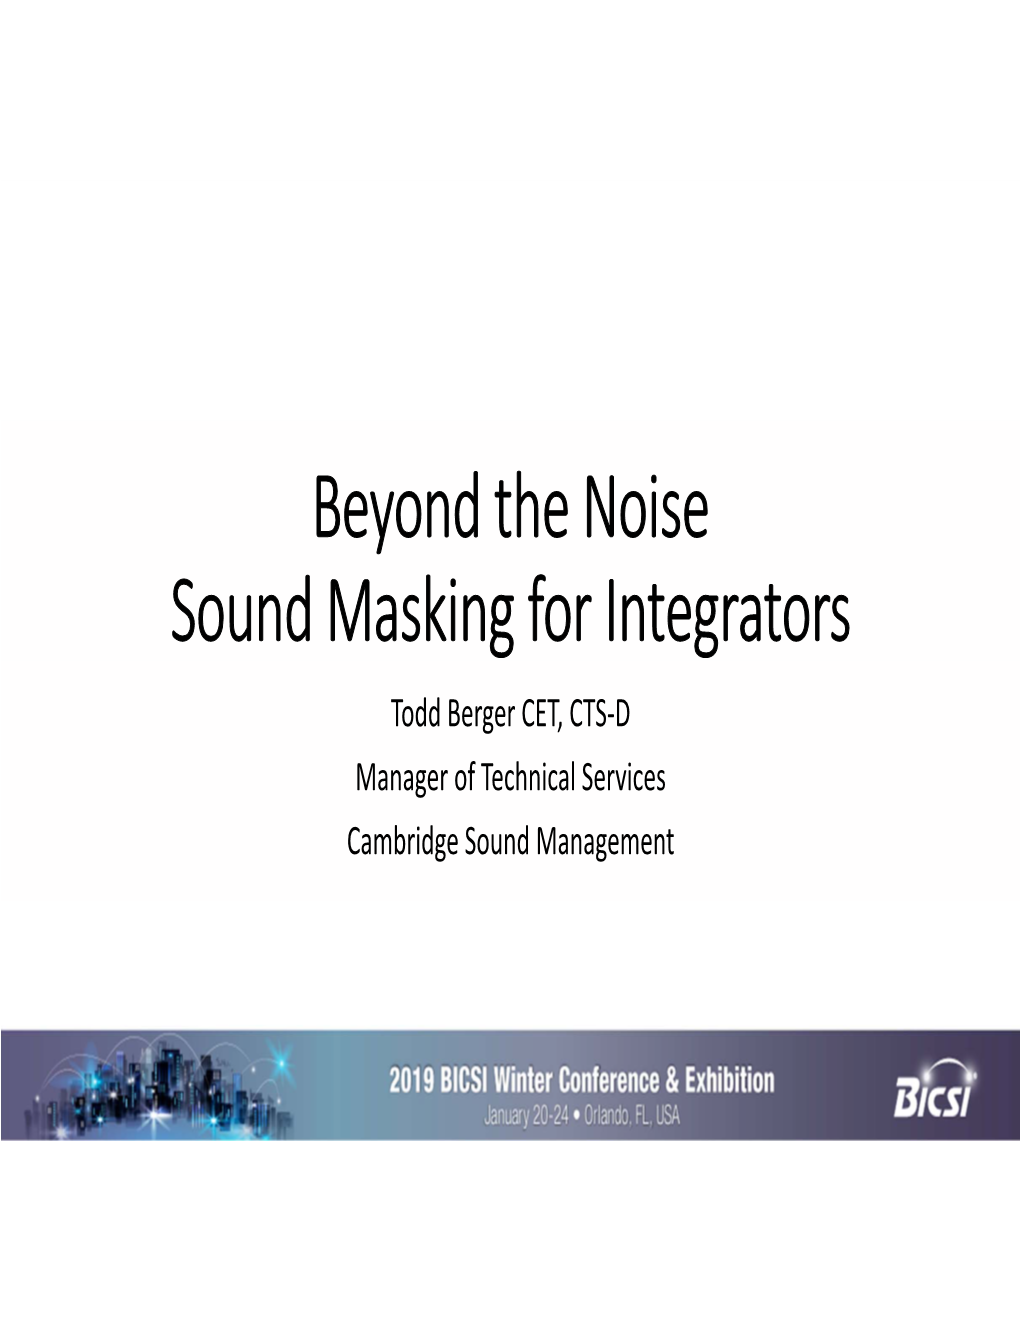 Beyond the Noise Sound Masking for Integrators